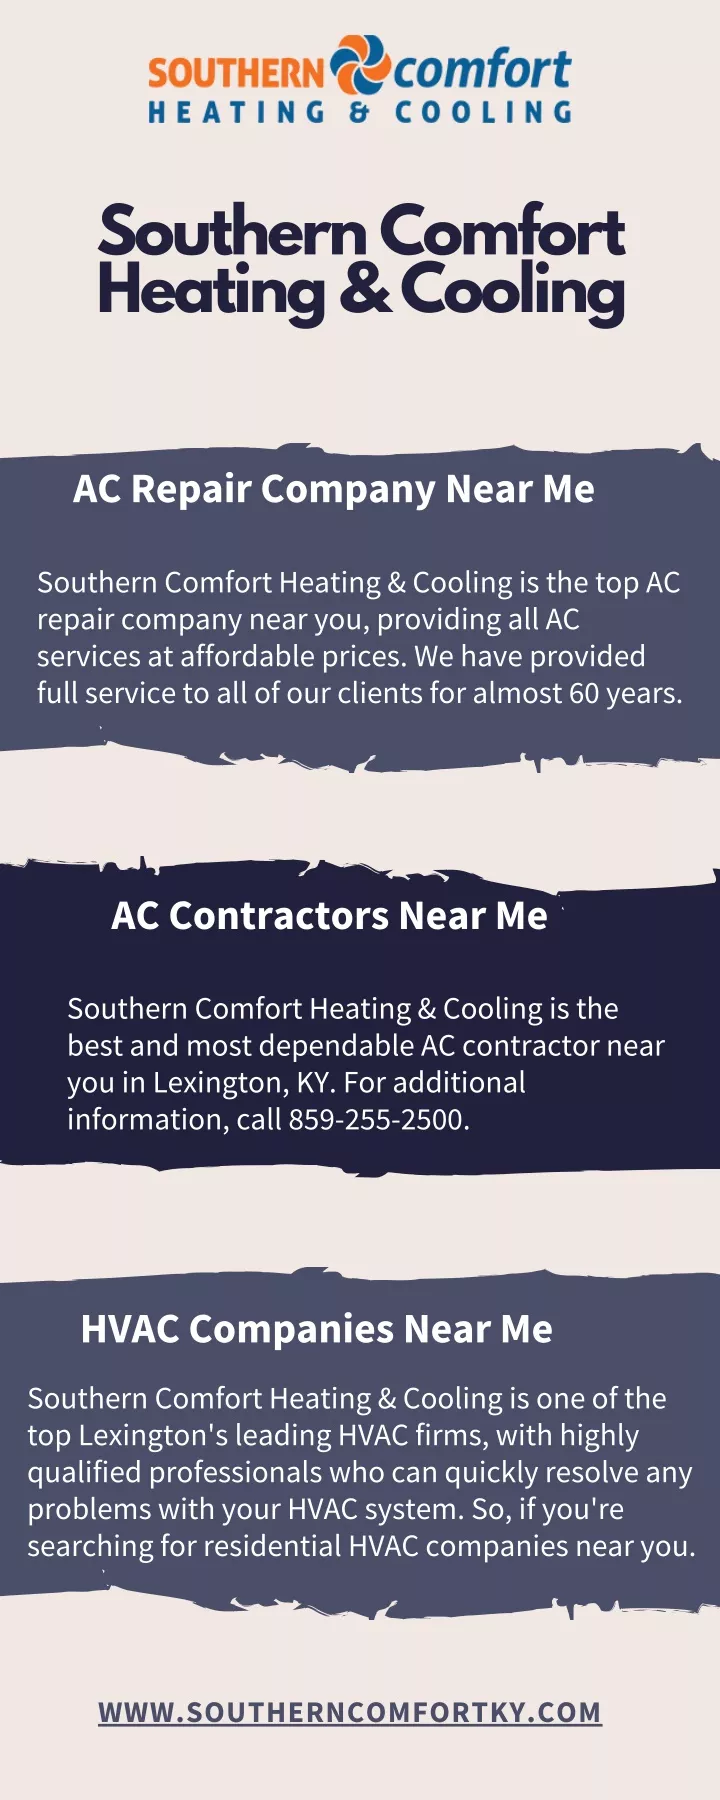 southern comfort heating cooling